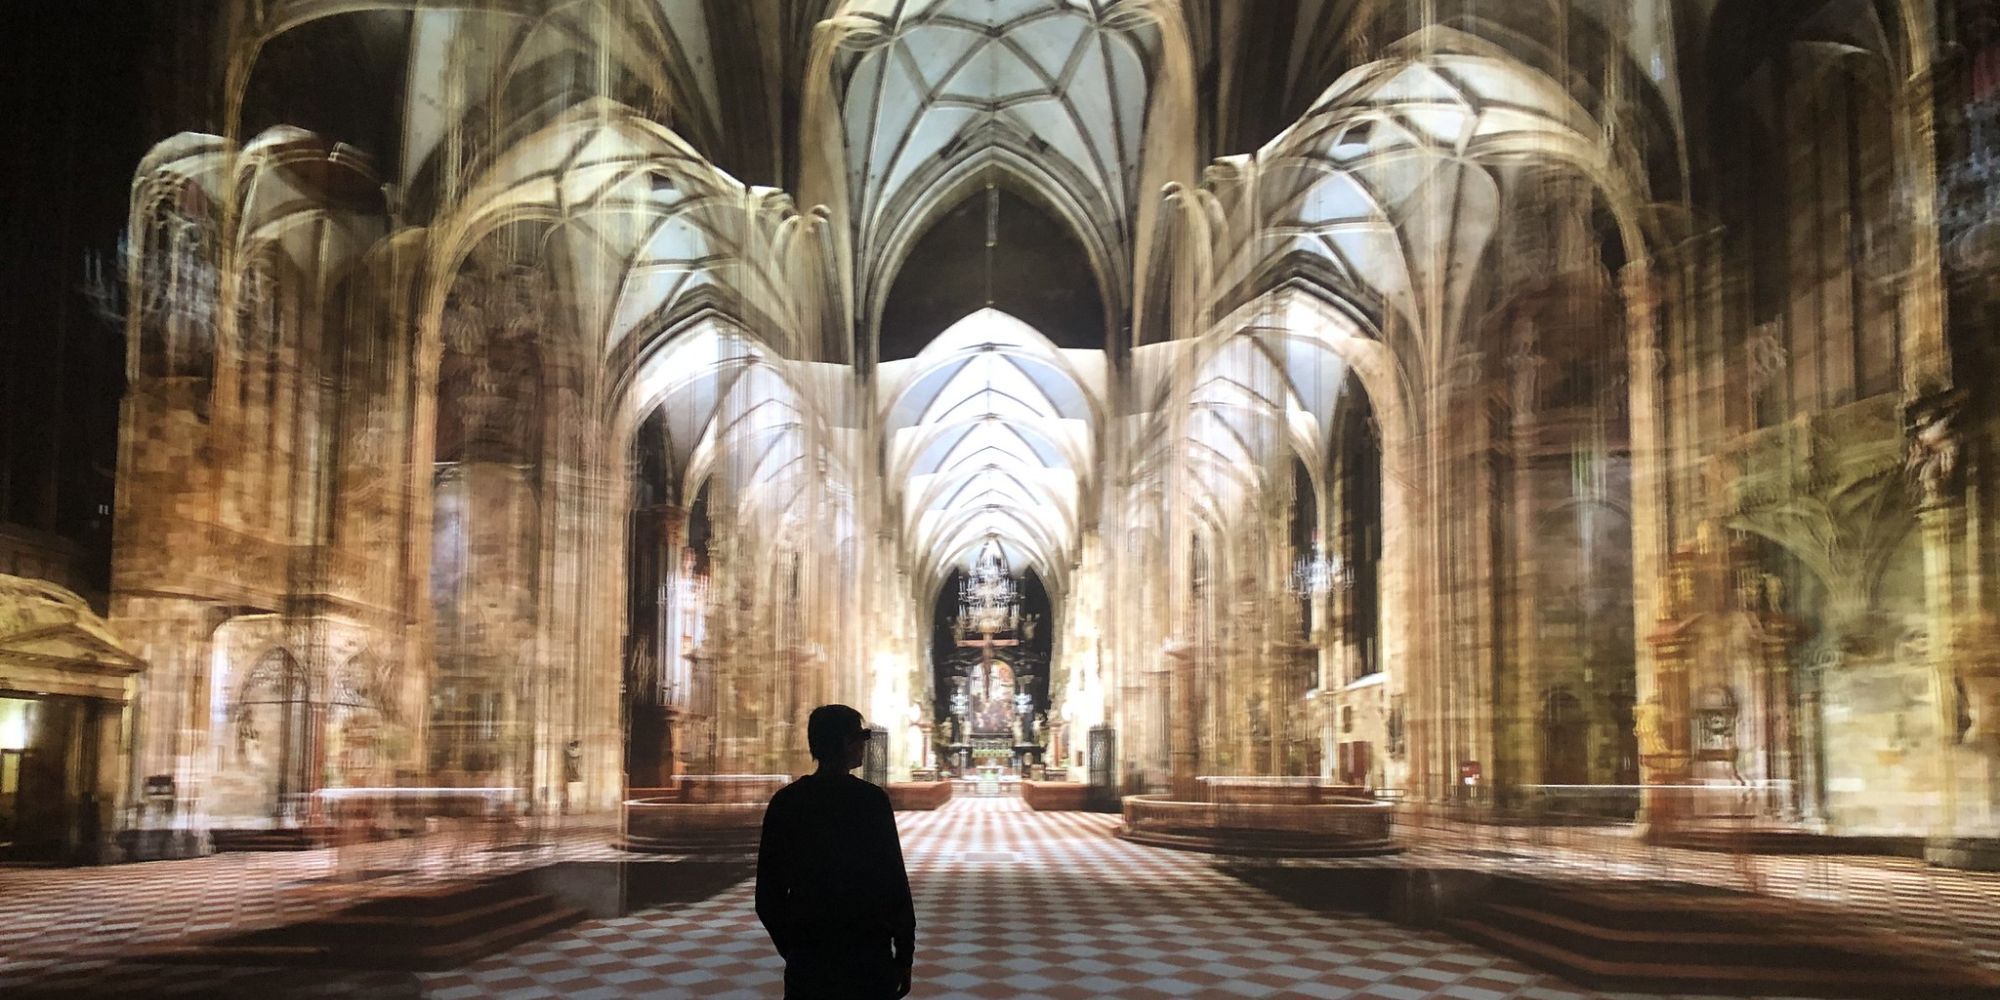 Immersify: The translucent St. Stephen’s Cathedral